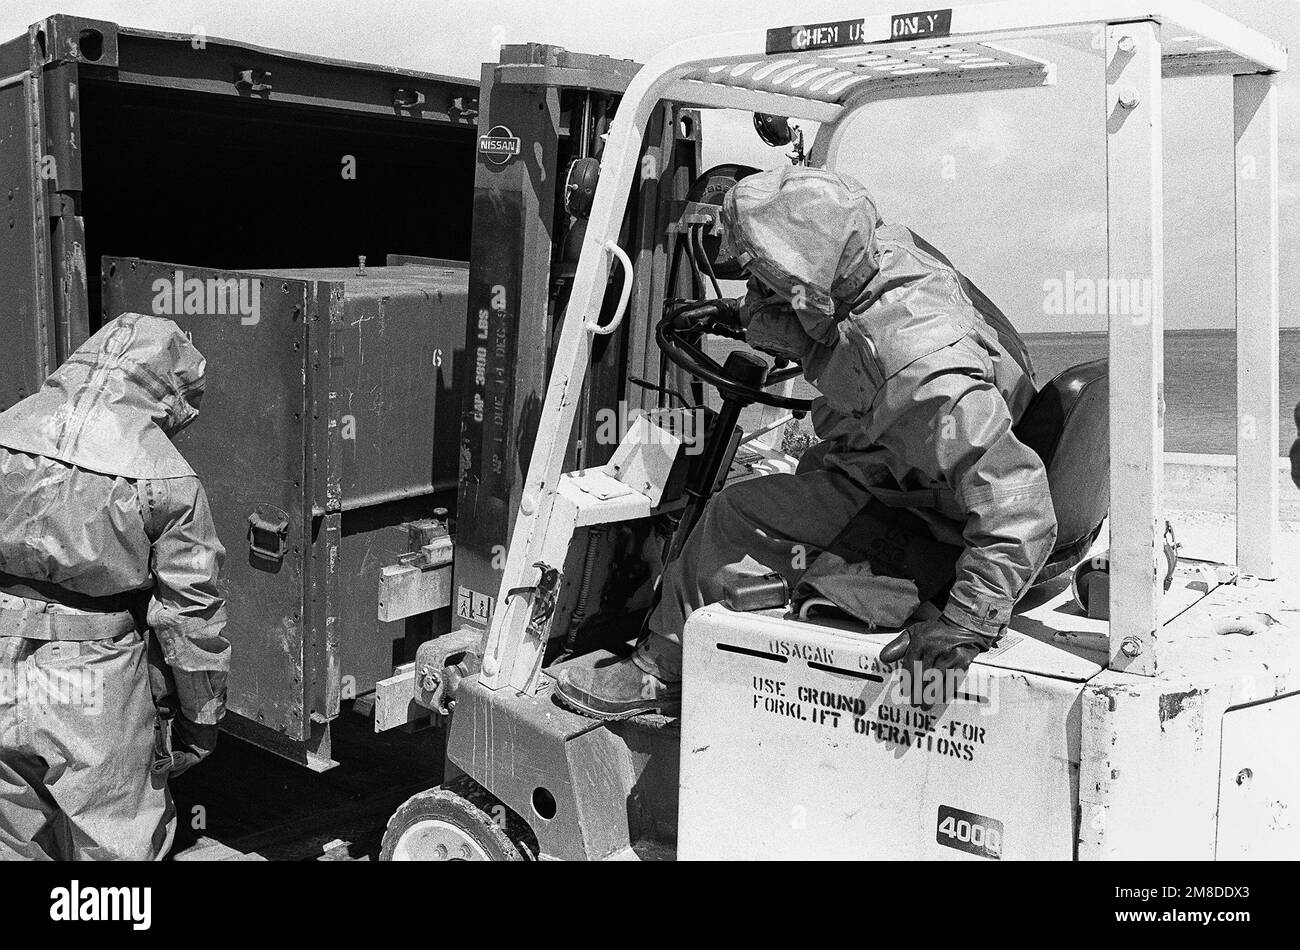 Wearing full protective gear, members of the 71st Chemical Regiment, 25th Infantry Division (Light), unload a sealed container of chemical munitions from a container express (CONEX) box during an exercise designed to test the unit's ability to detect and mitigate a chemical leak. Base: US Army Chemical Activity Country: Johnston Atoll Stock Photo